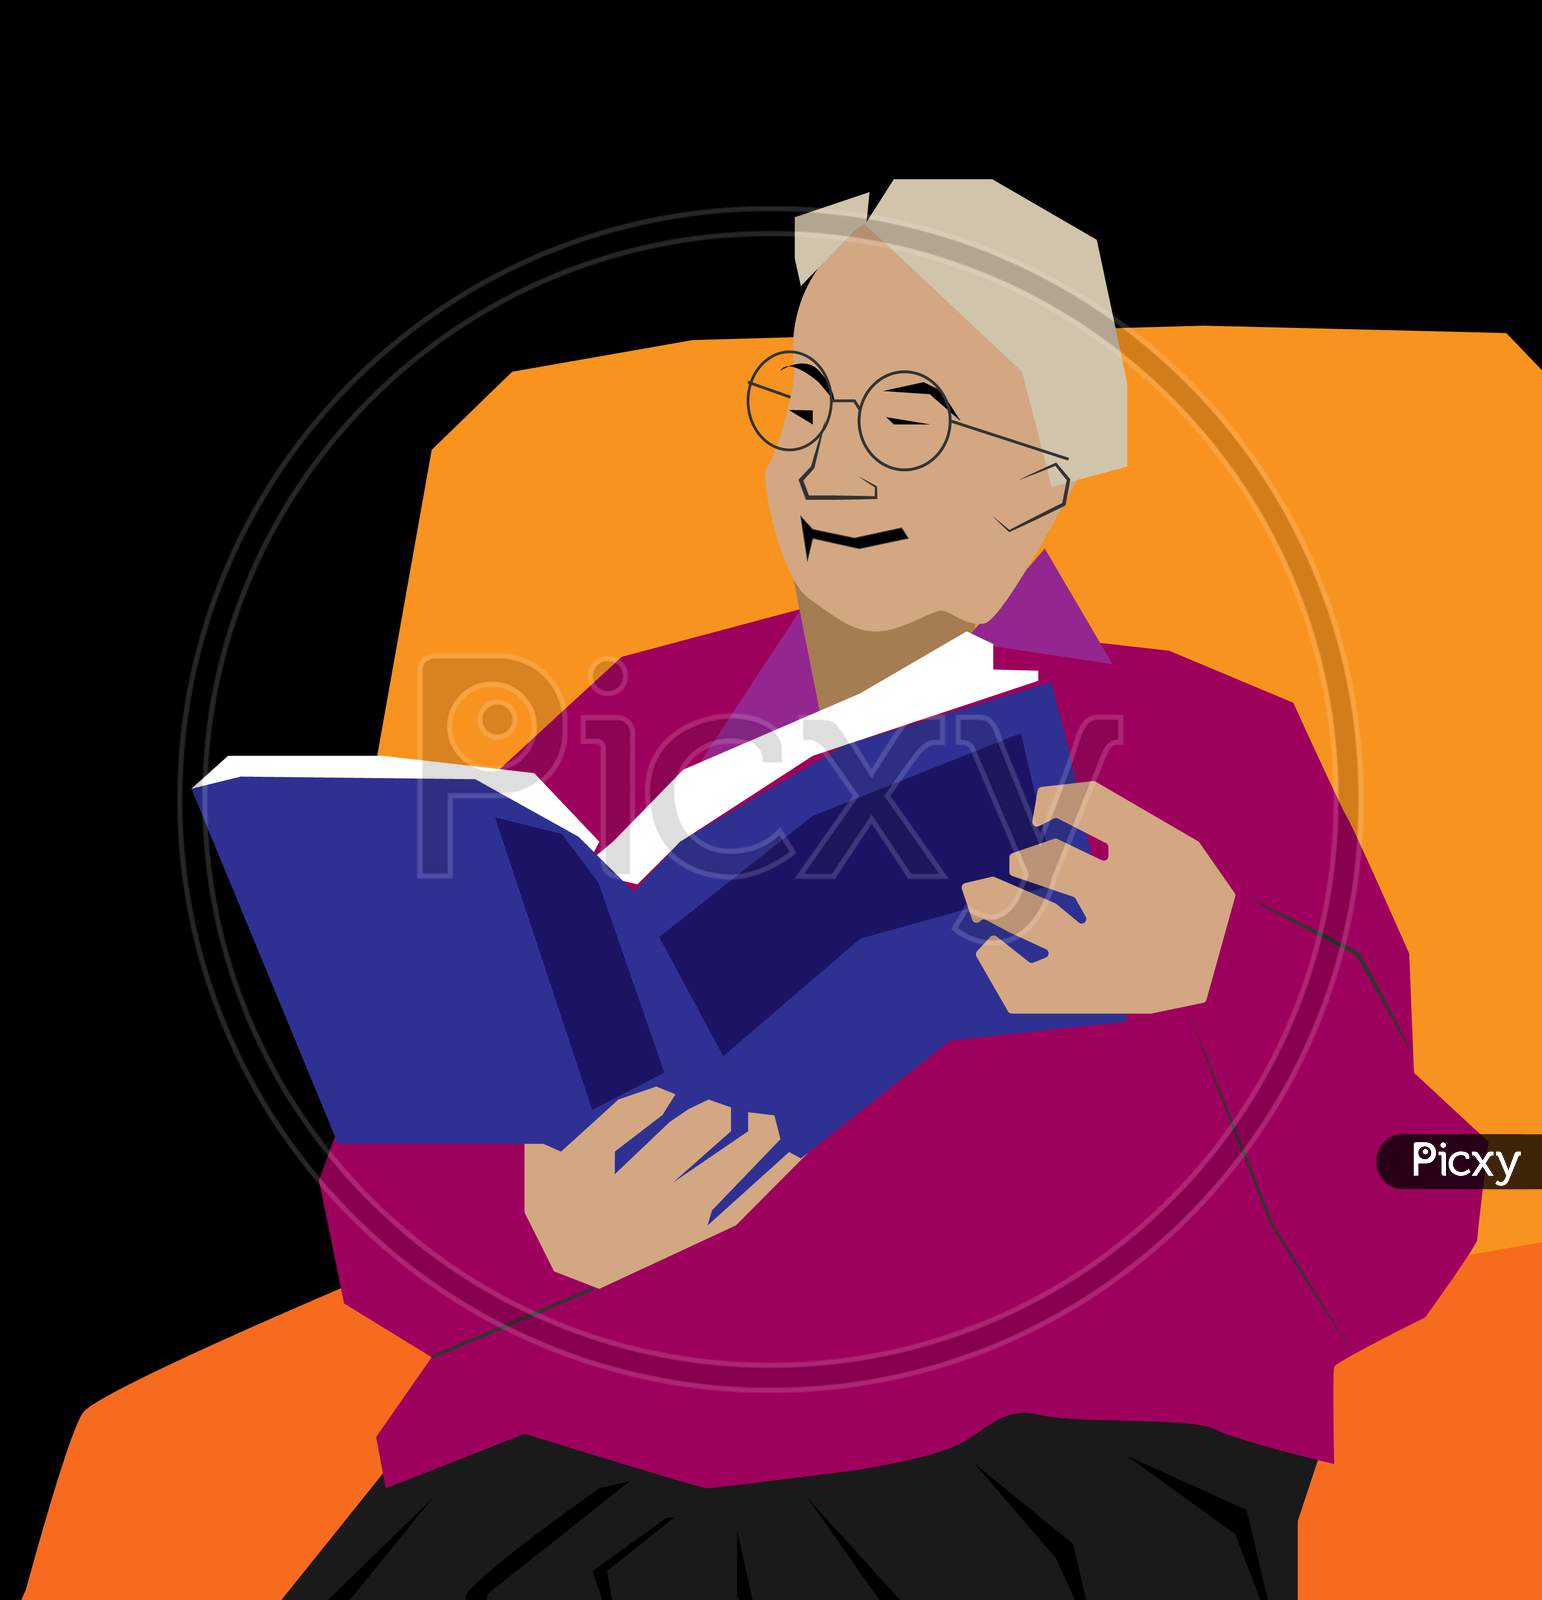 Indian Old Lady reading a book illustration image